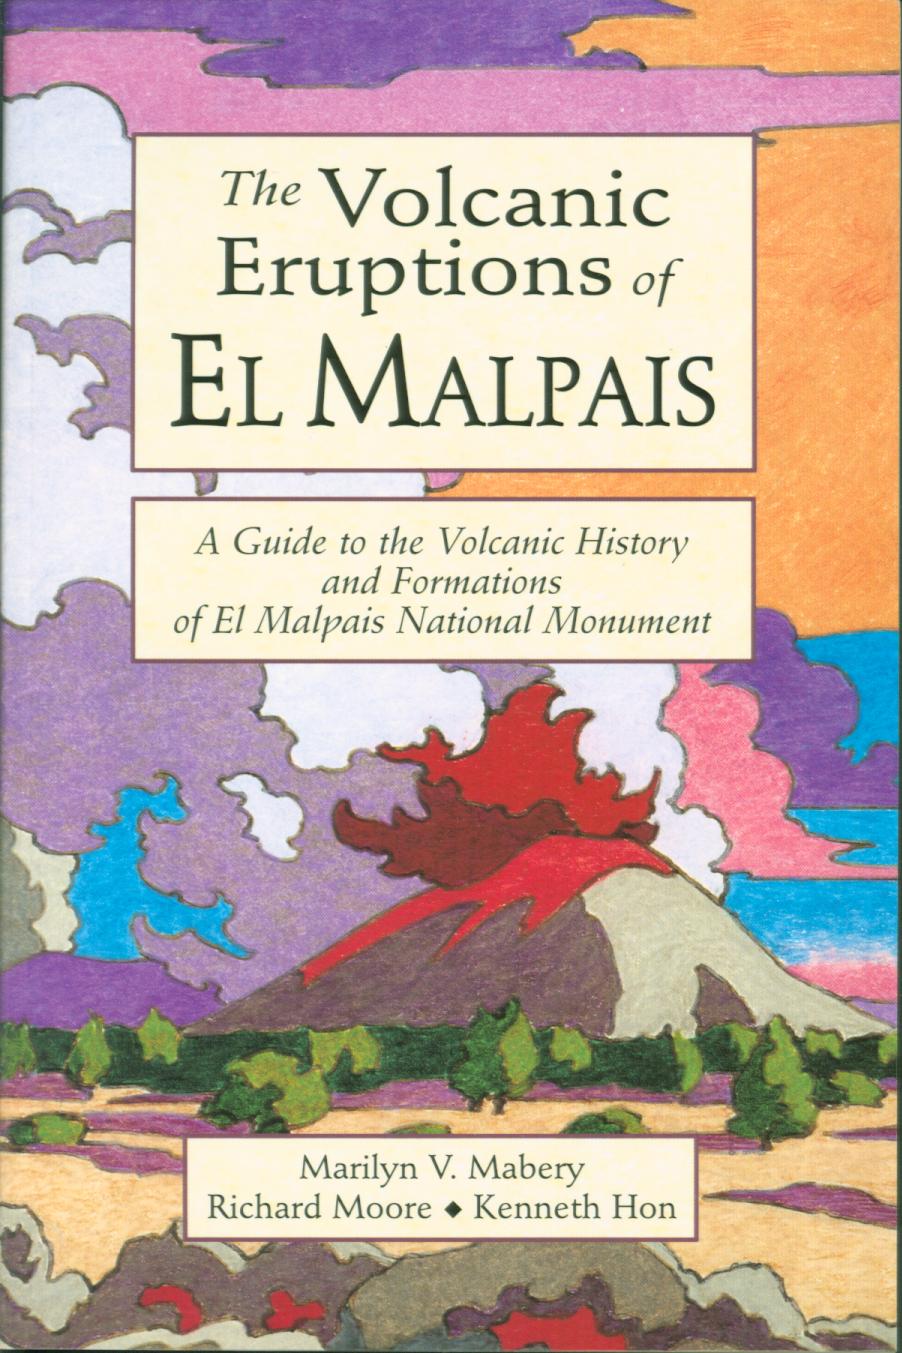 VOLCANIC ERUPTIONS OF EL MALPAIS, THE: a guide to the volcanic history and formations of El Malpais National Monument (NM). 